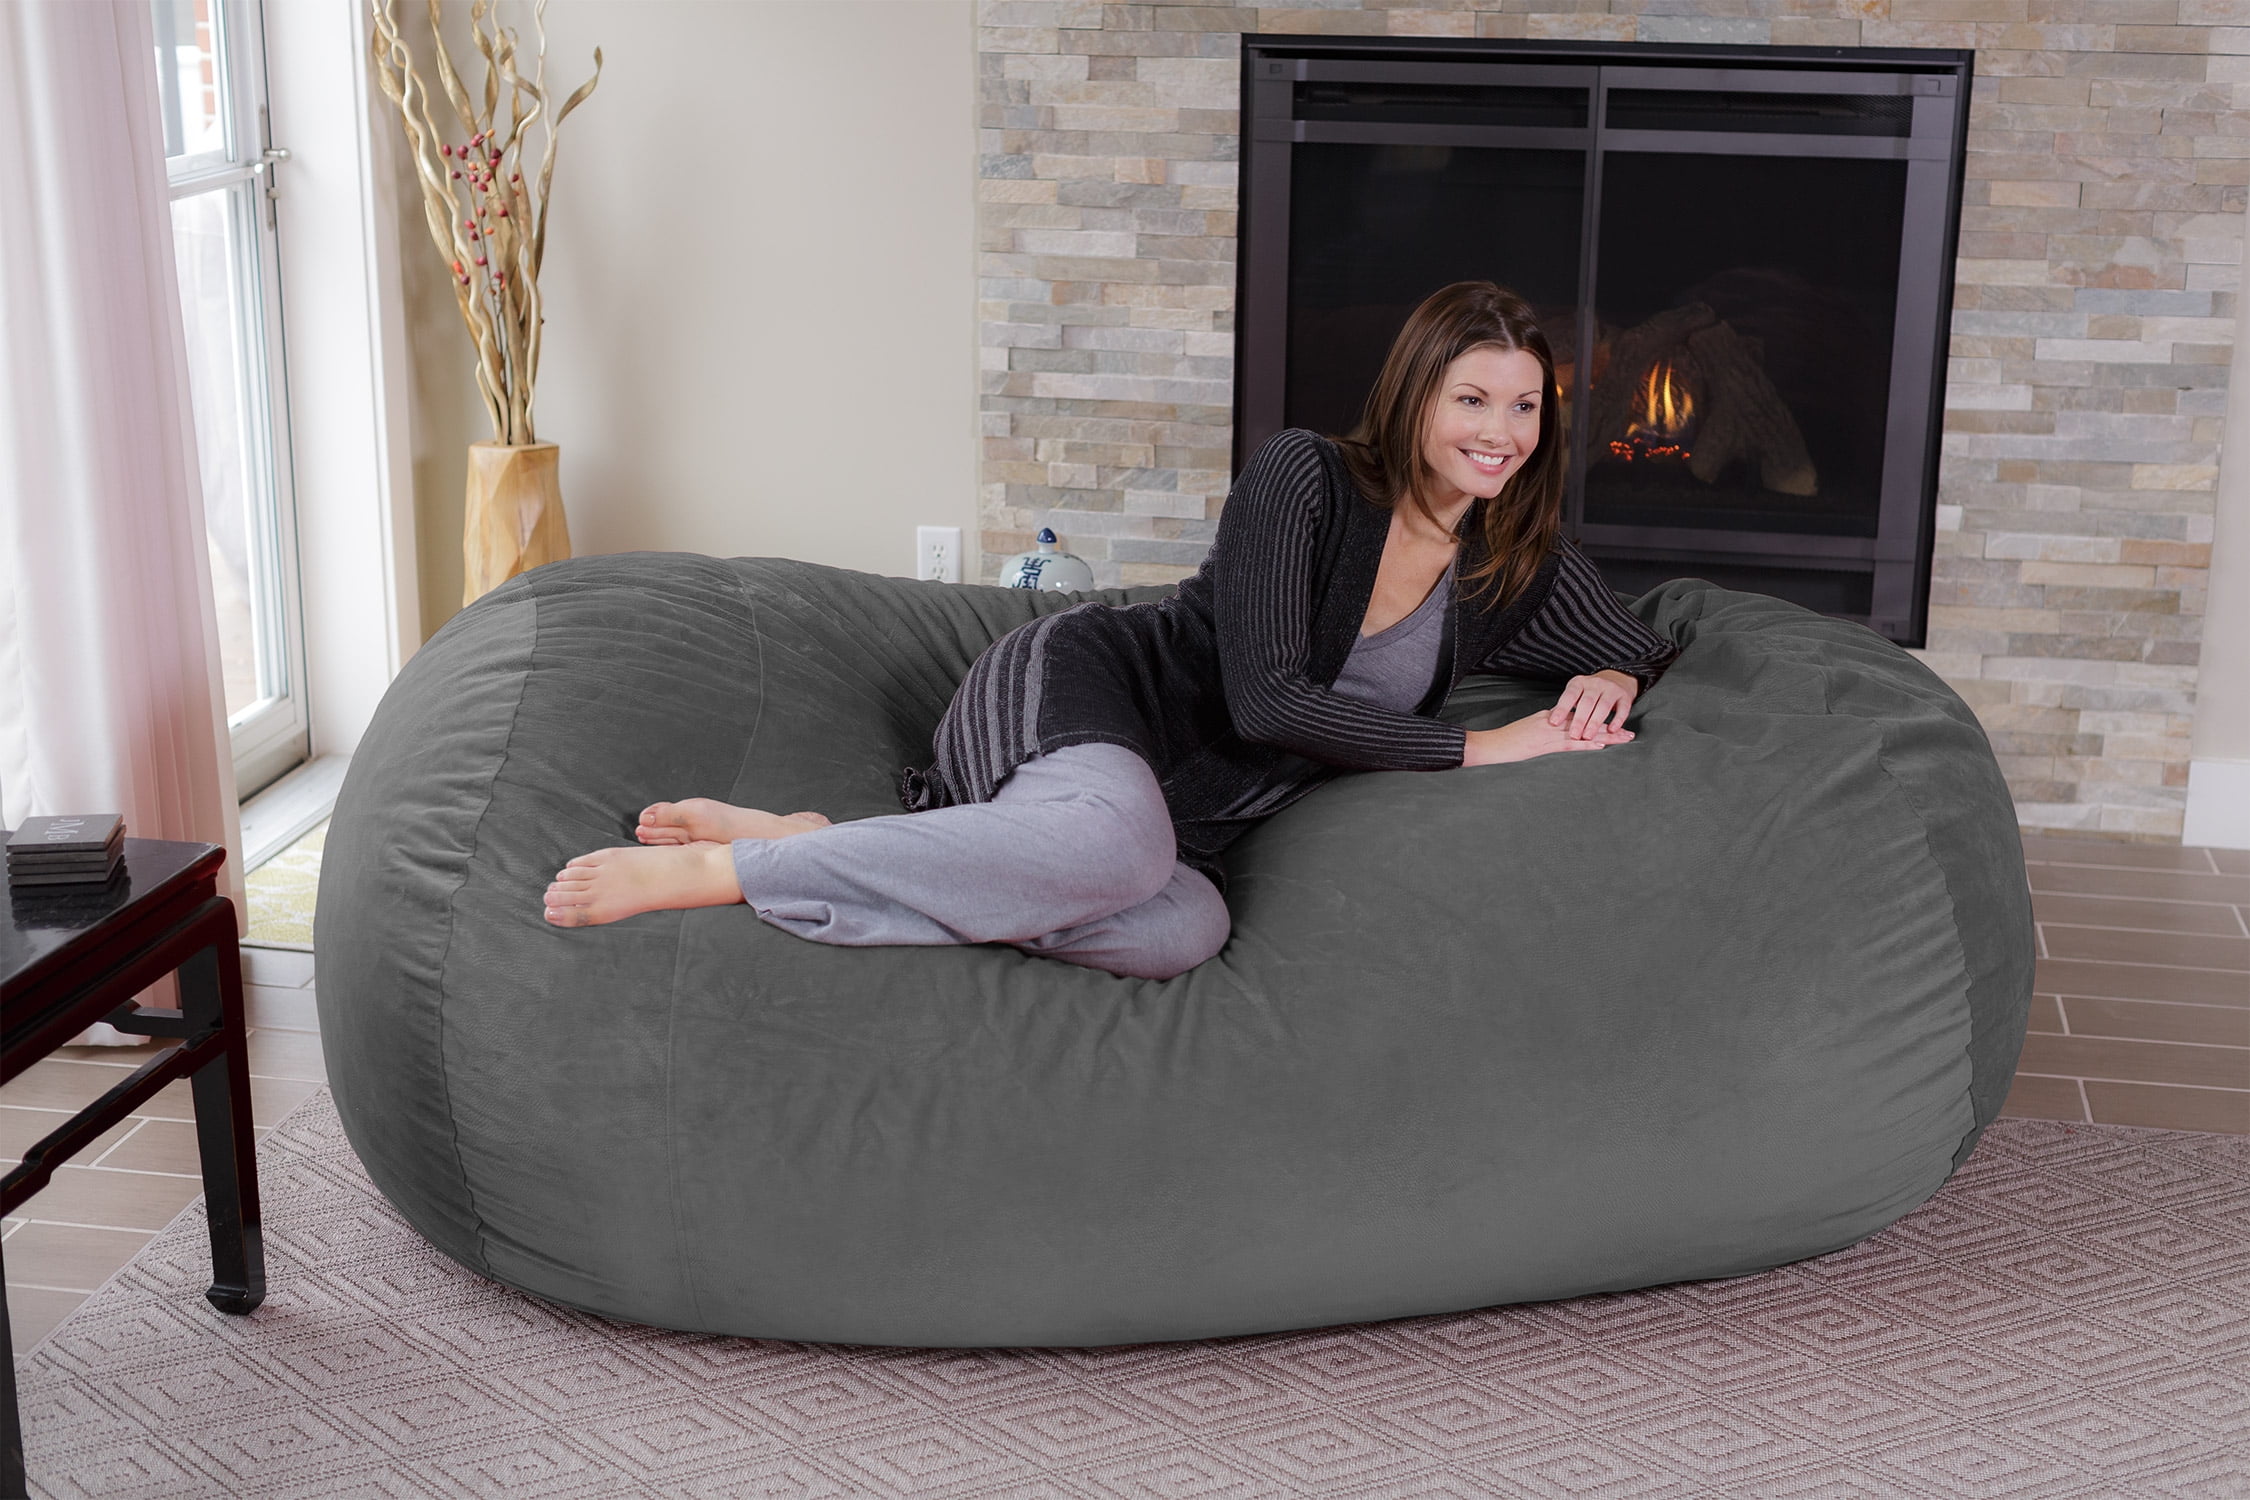 6' Large Bean Bag Lounger With Memory Foam Filling And Washable Cover -  Relax Sacks : Target